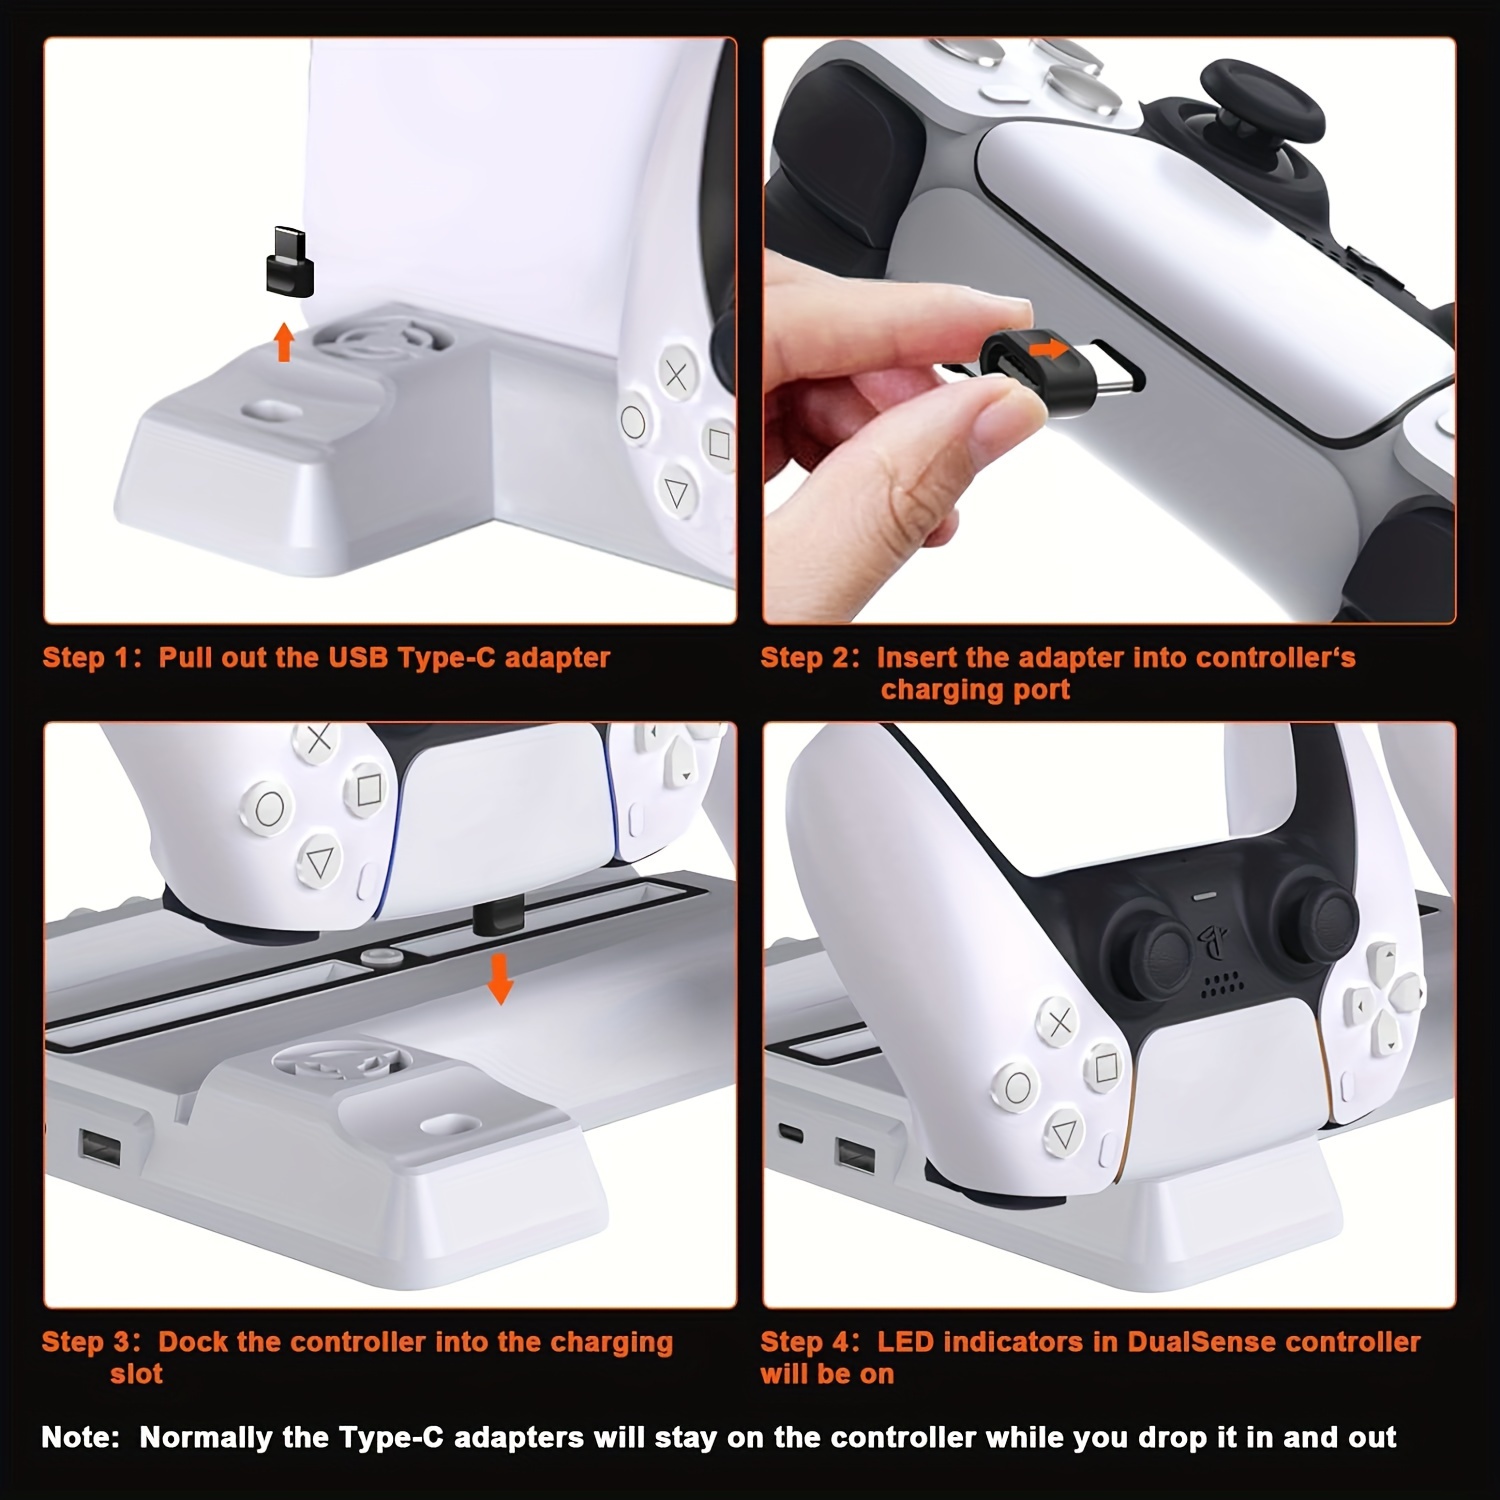 For PS5 Slim Stand And Cooling Station Dual-Controller Charger For PS5  Console Compatible With PS5 Disc & Digital Editions For PS5 Slim